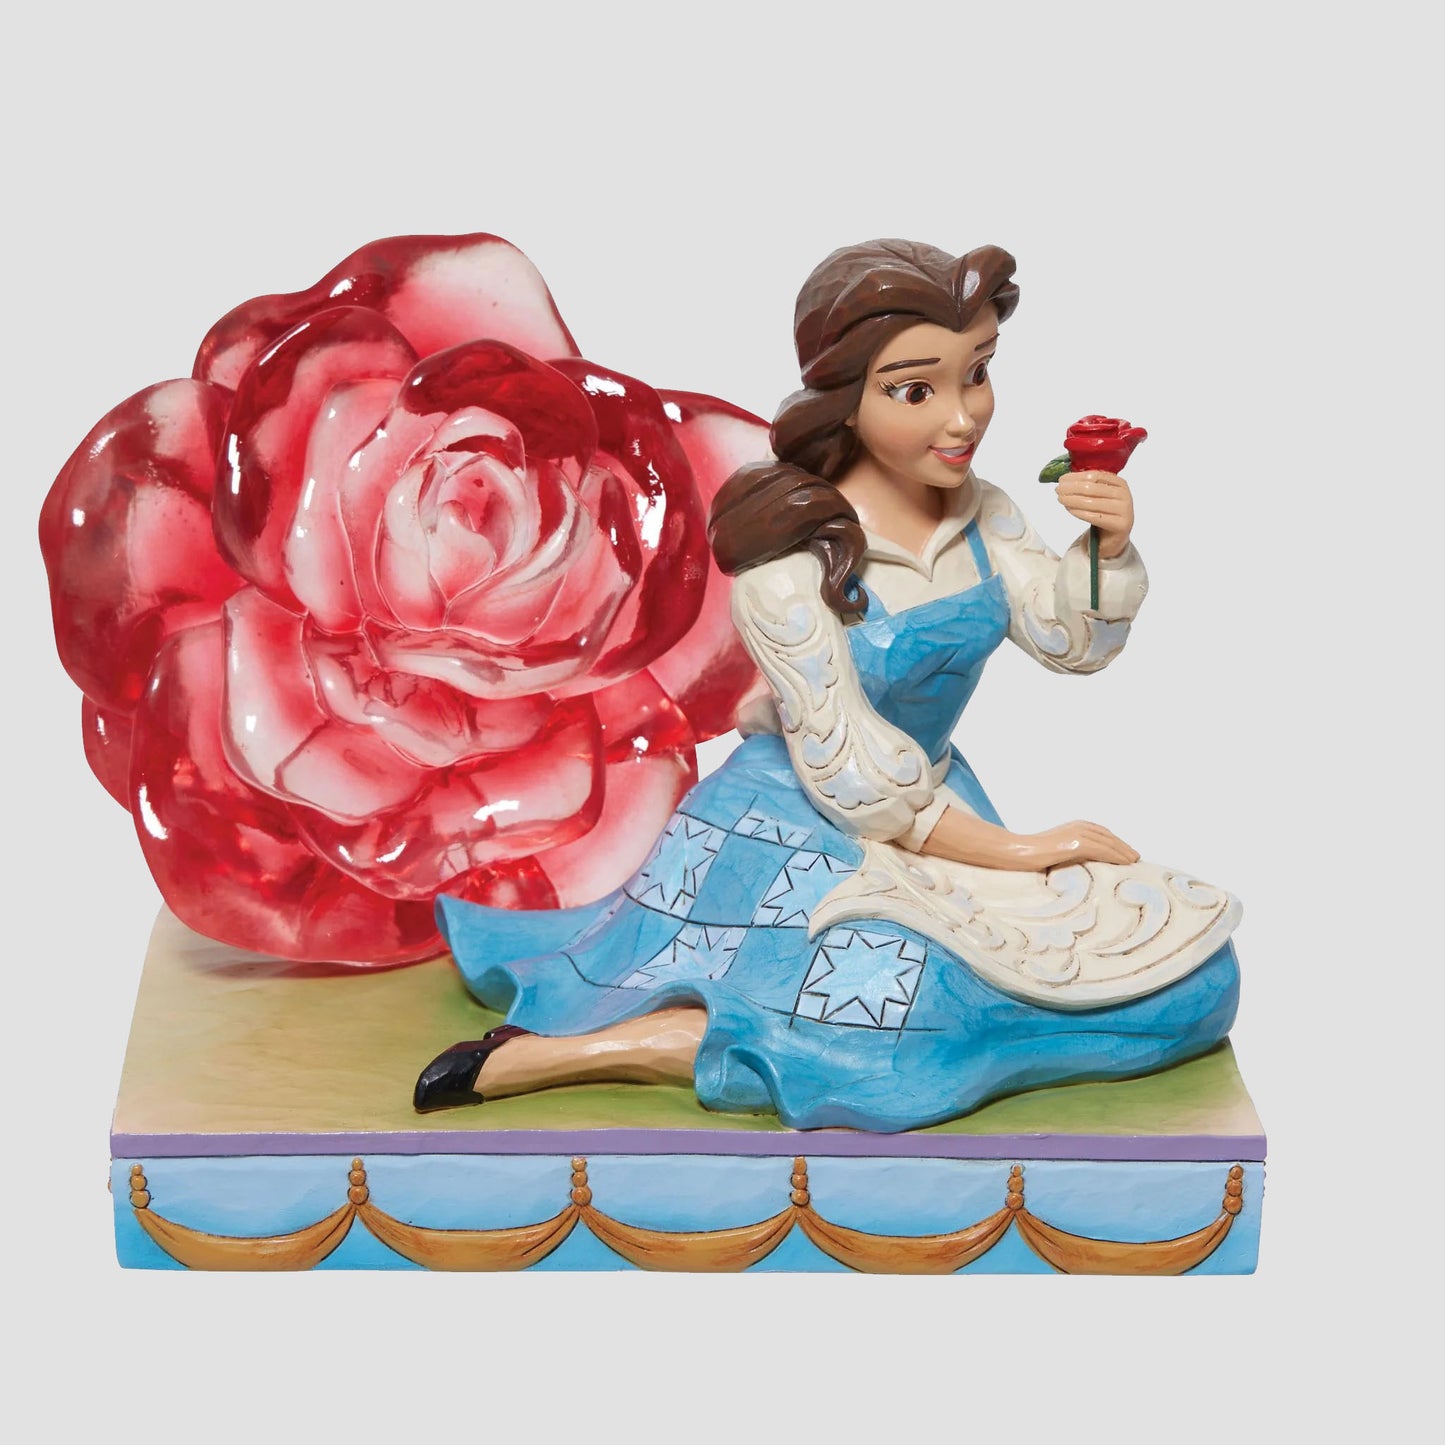 Belle "An Enchanted Rose" Beauty and the Beast Jim Shore Disney Traditions Statue